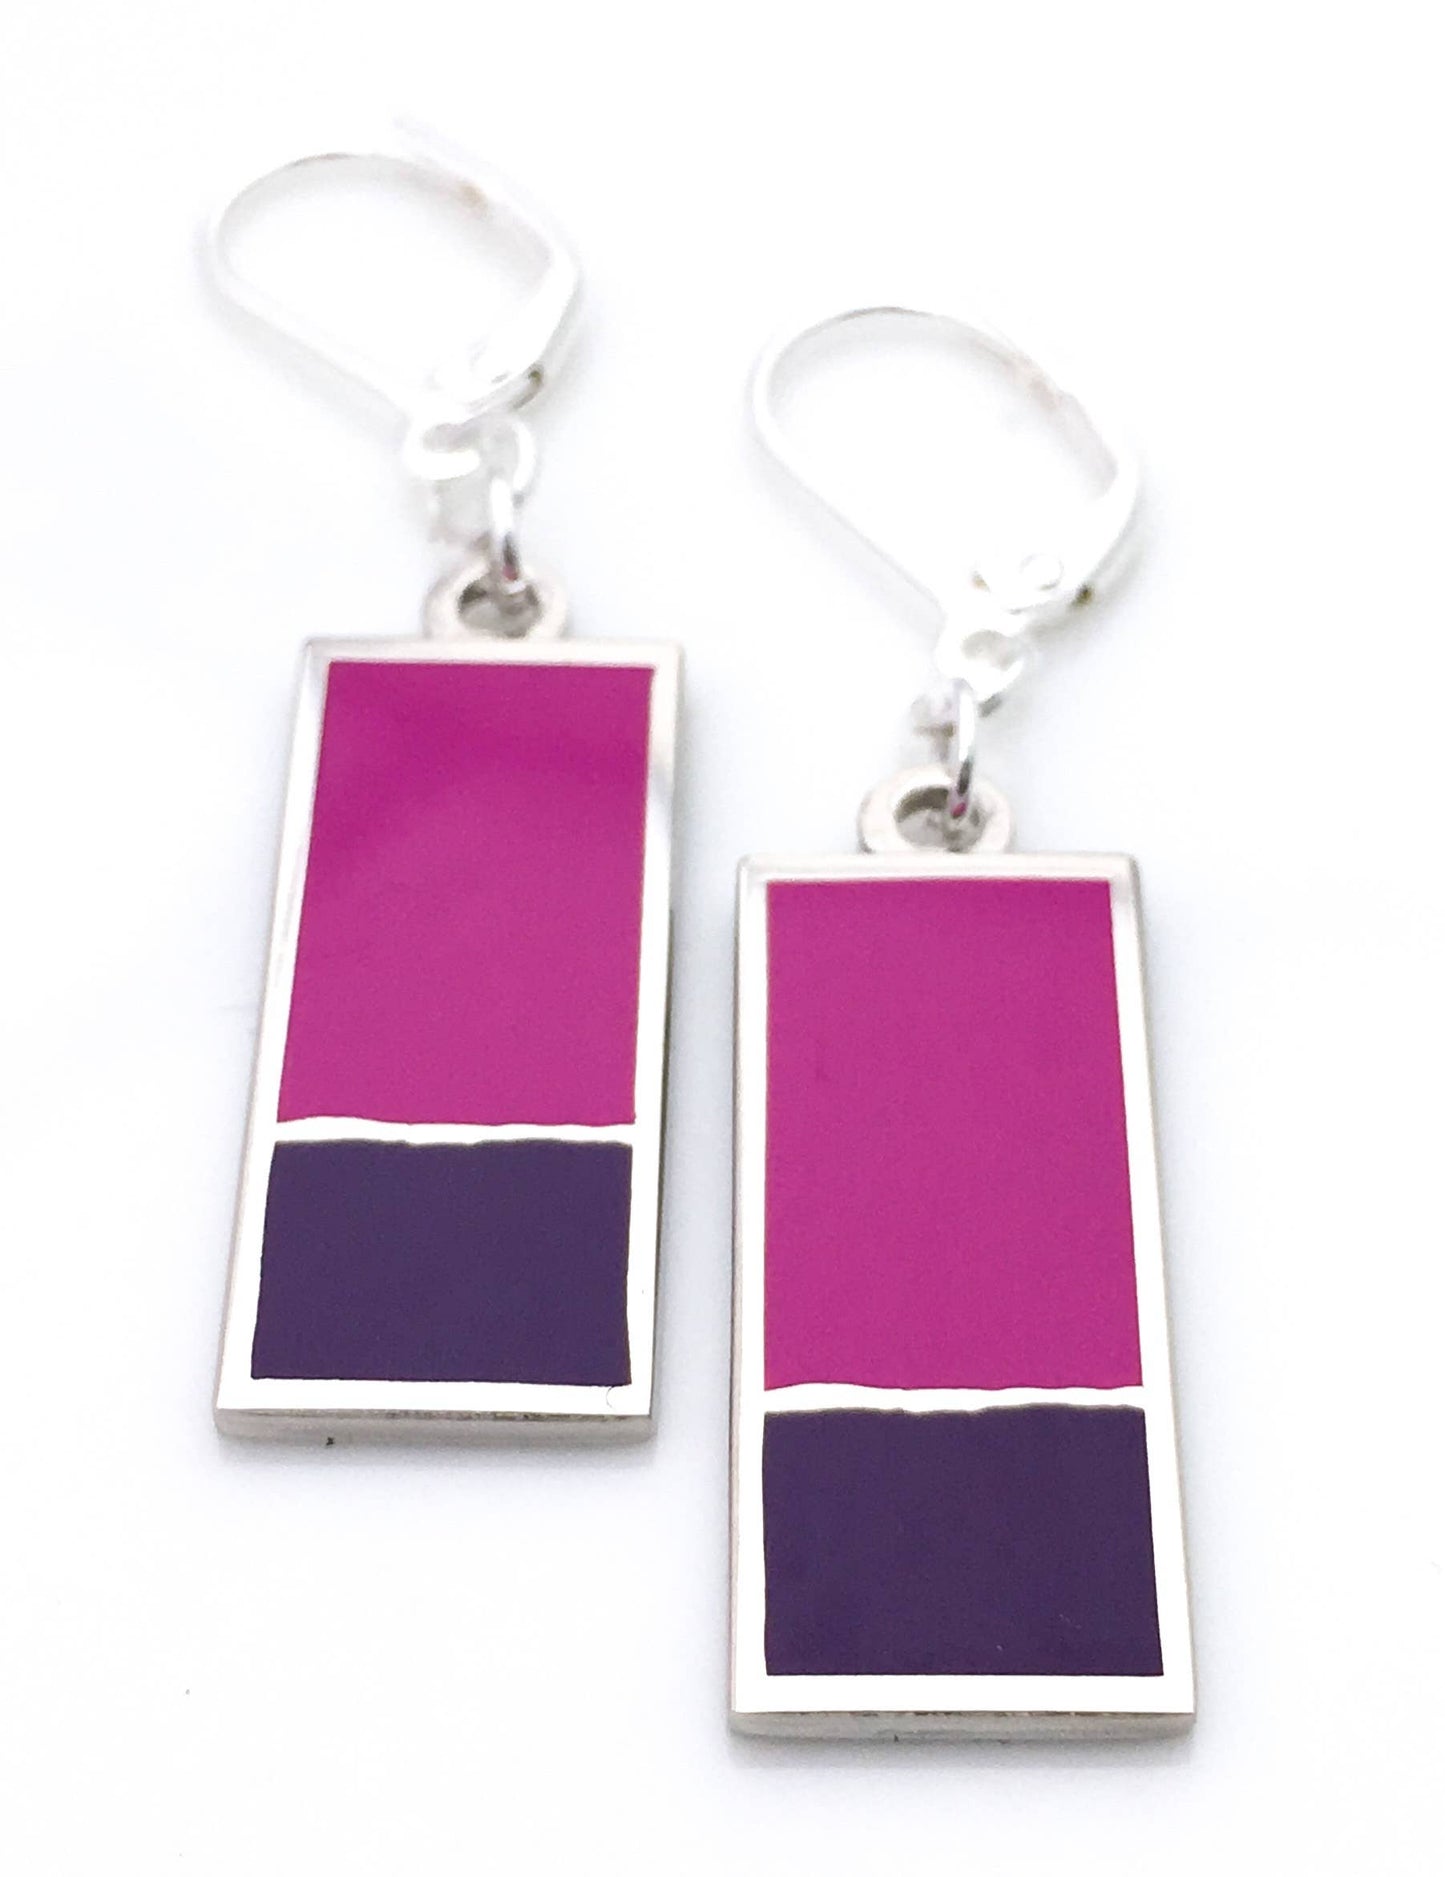 Enamel earrings with rectangle in purple enamel and smaller rectangle in mauve